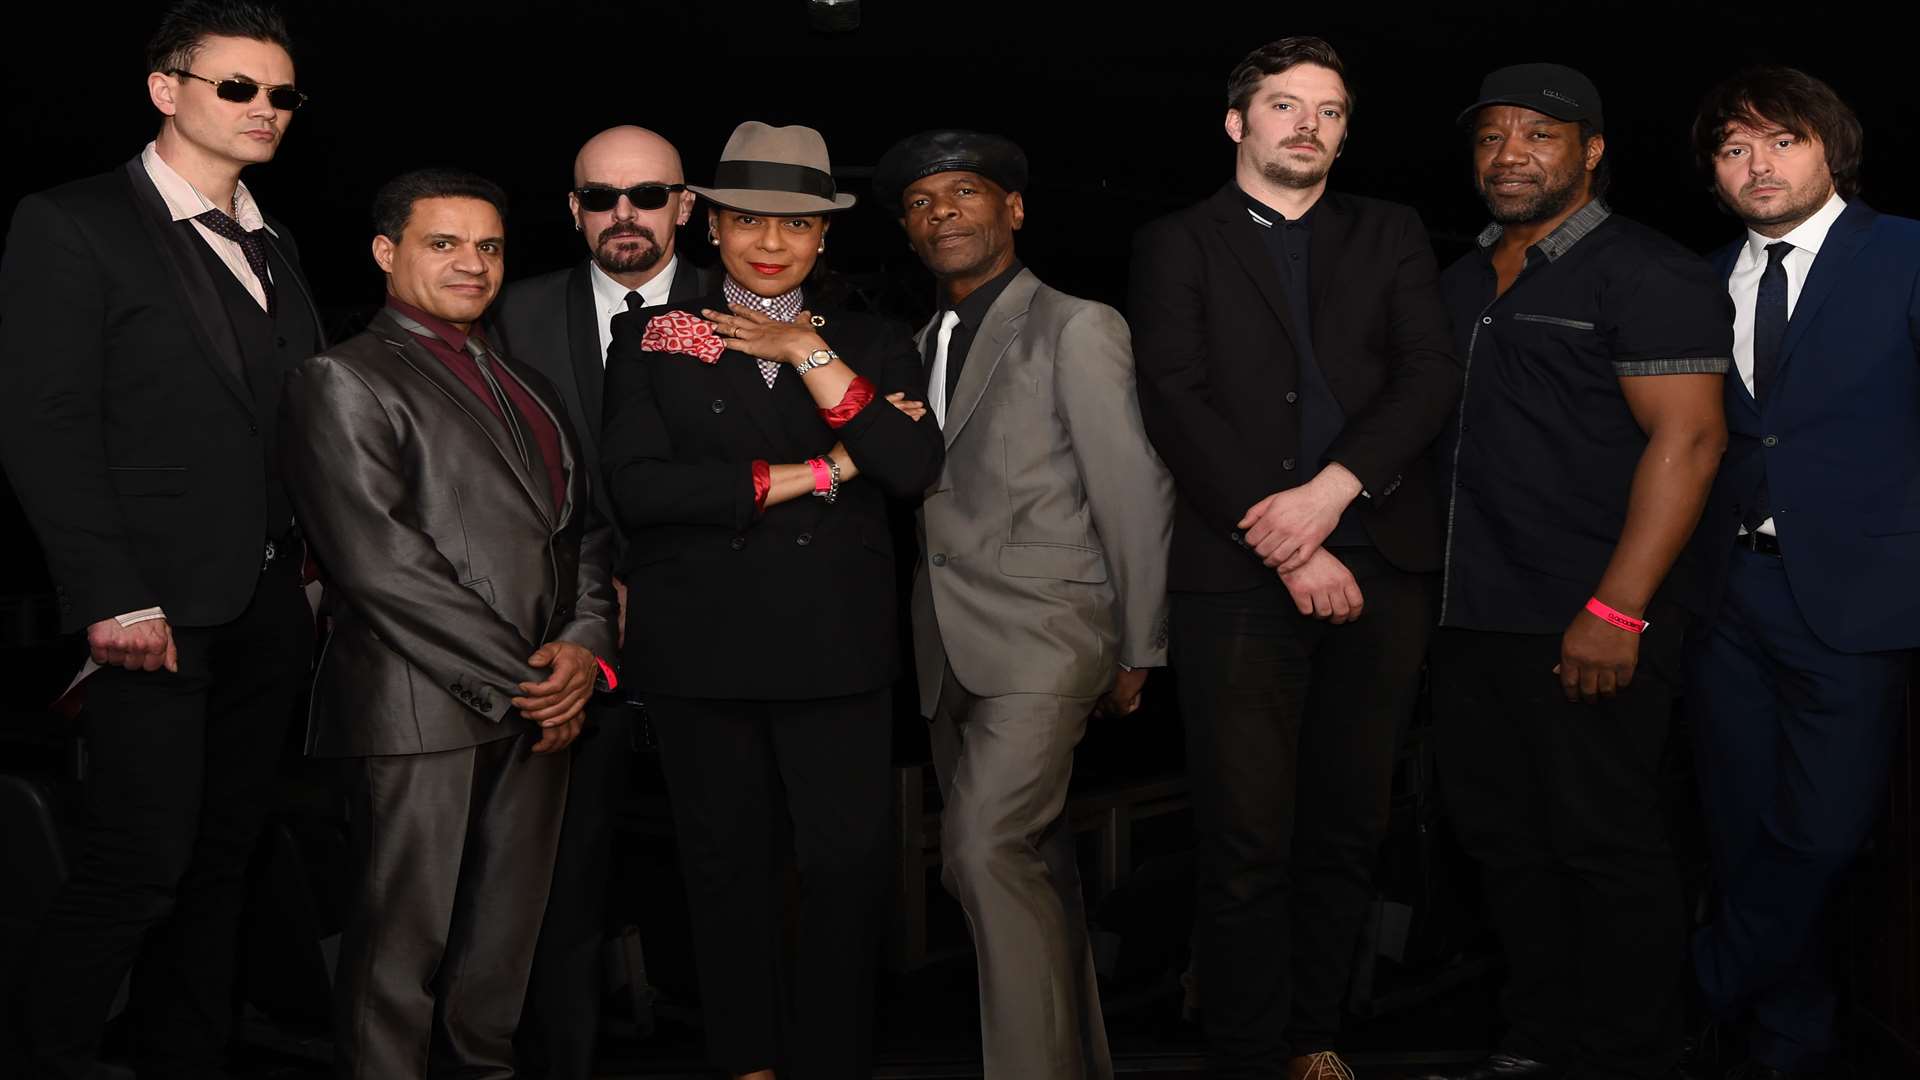 The Selecter will perform in Ashford. Pic courtesy of John Coles